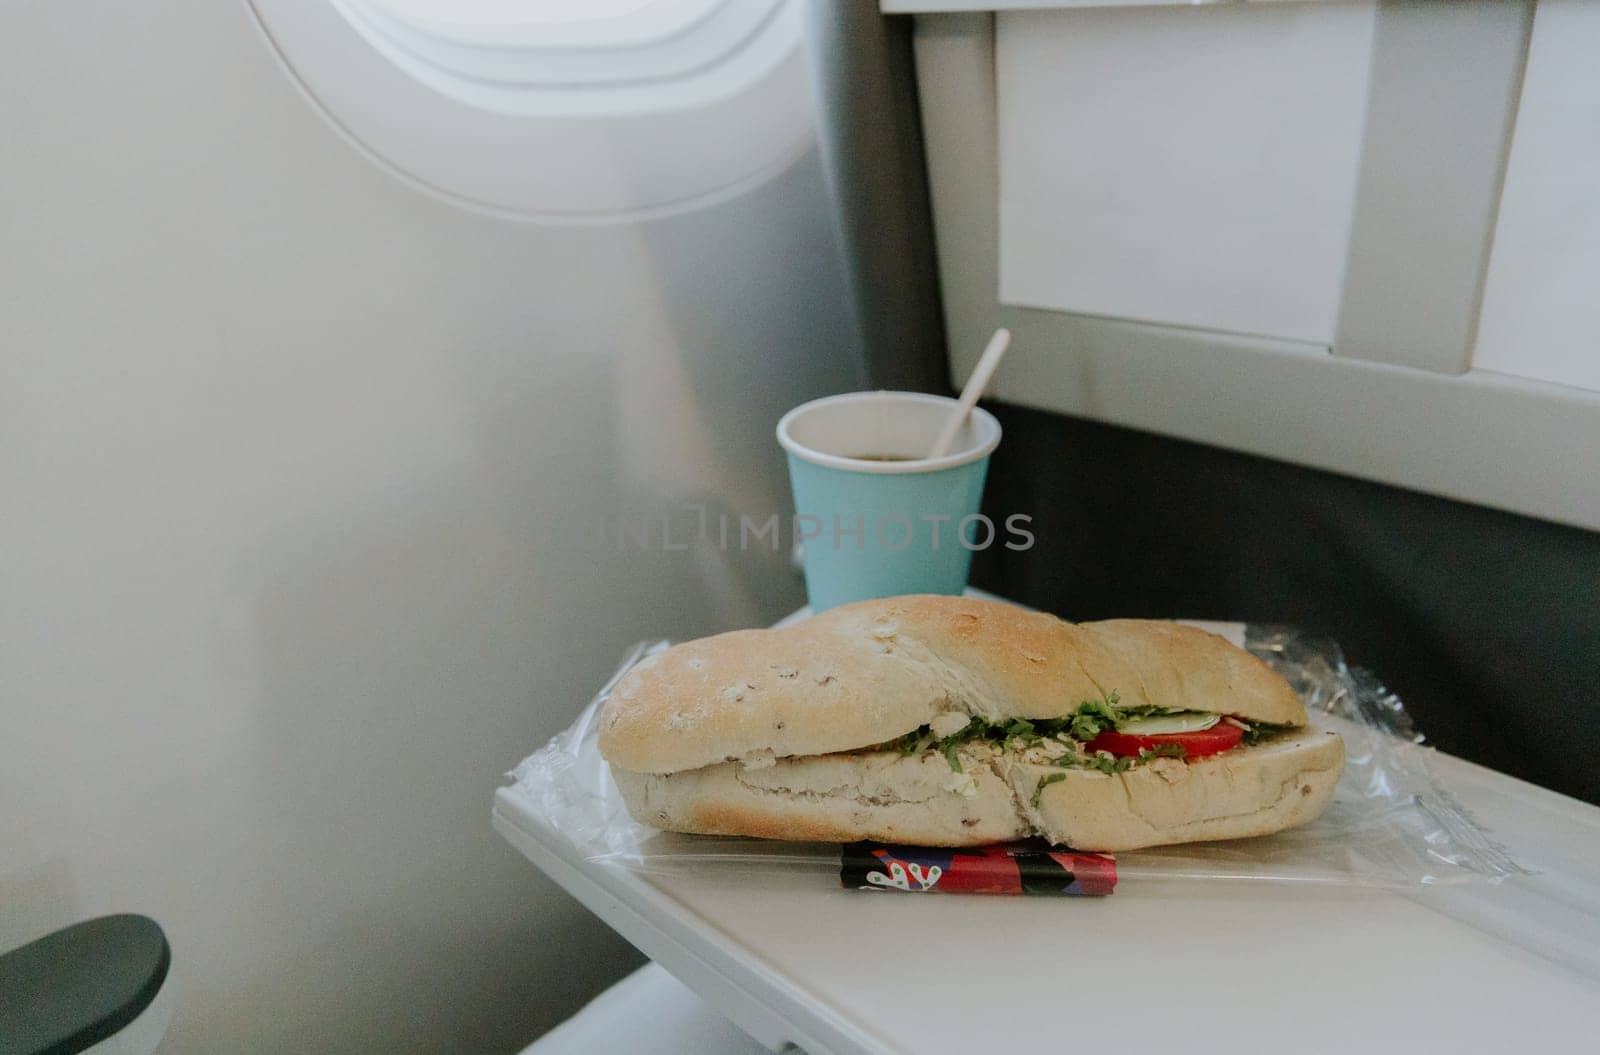 One appetizing sandwich with tuna, tomatoes and a paper glass of tea lie on a table on the plane, close-up side view.